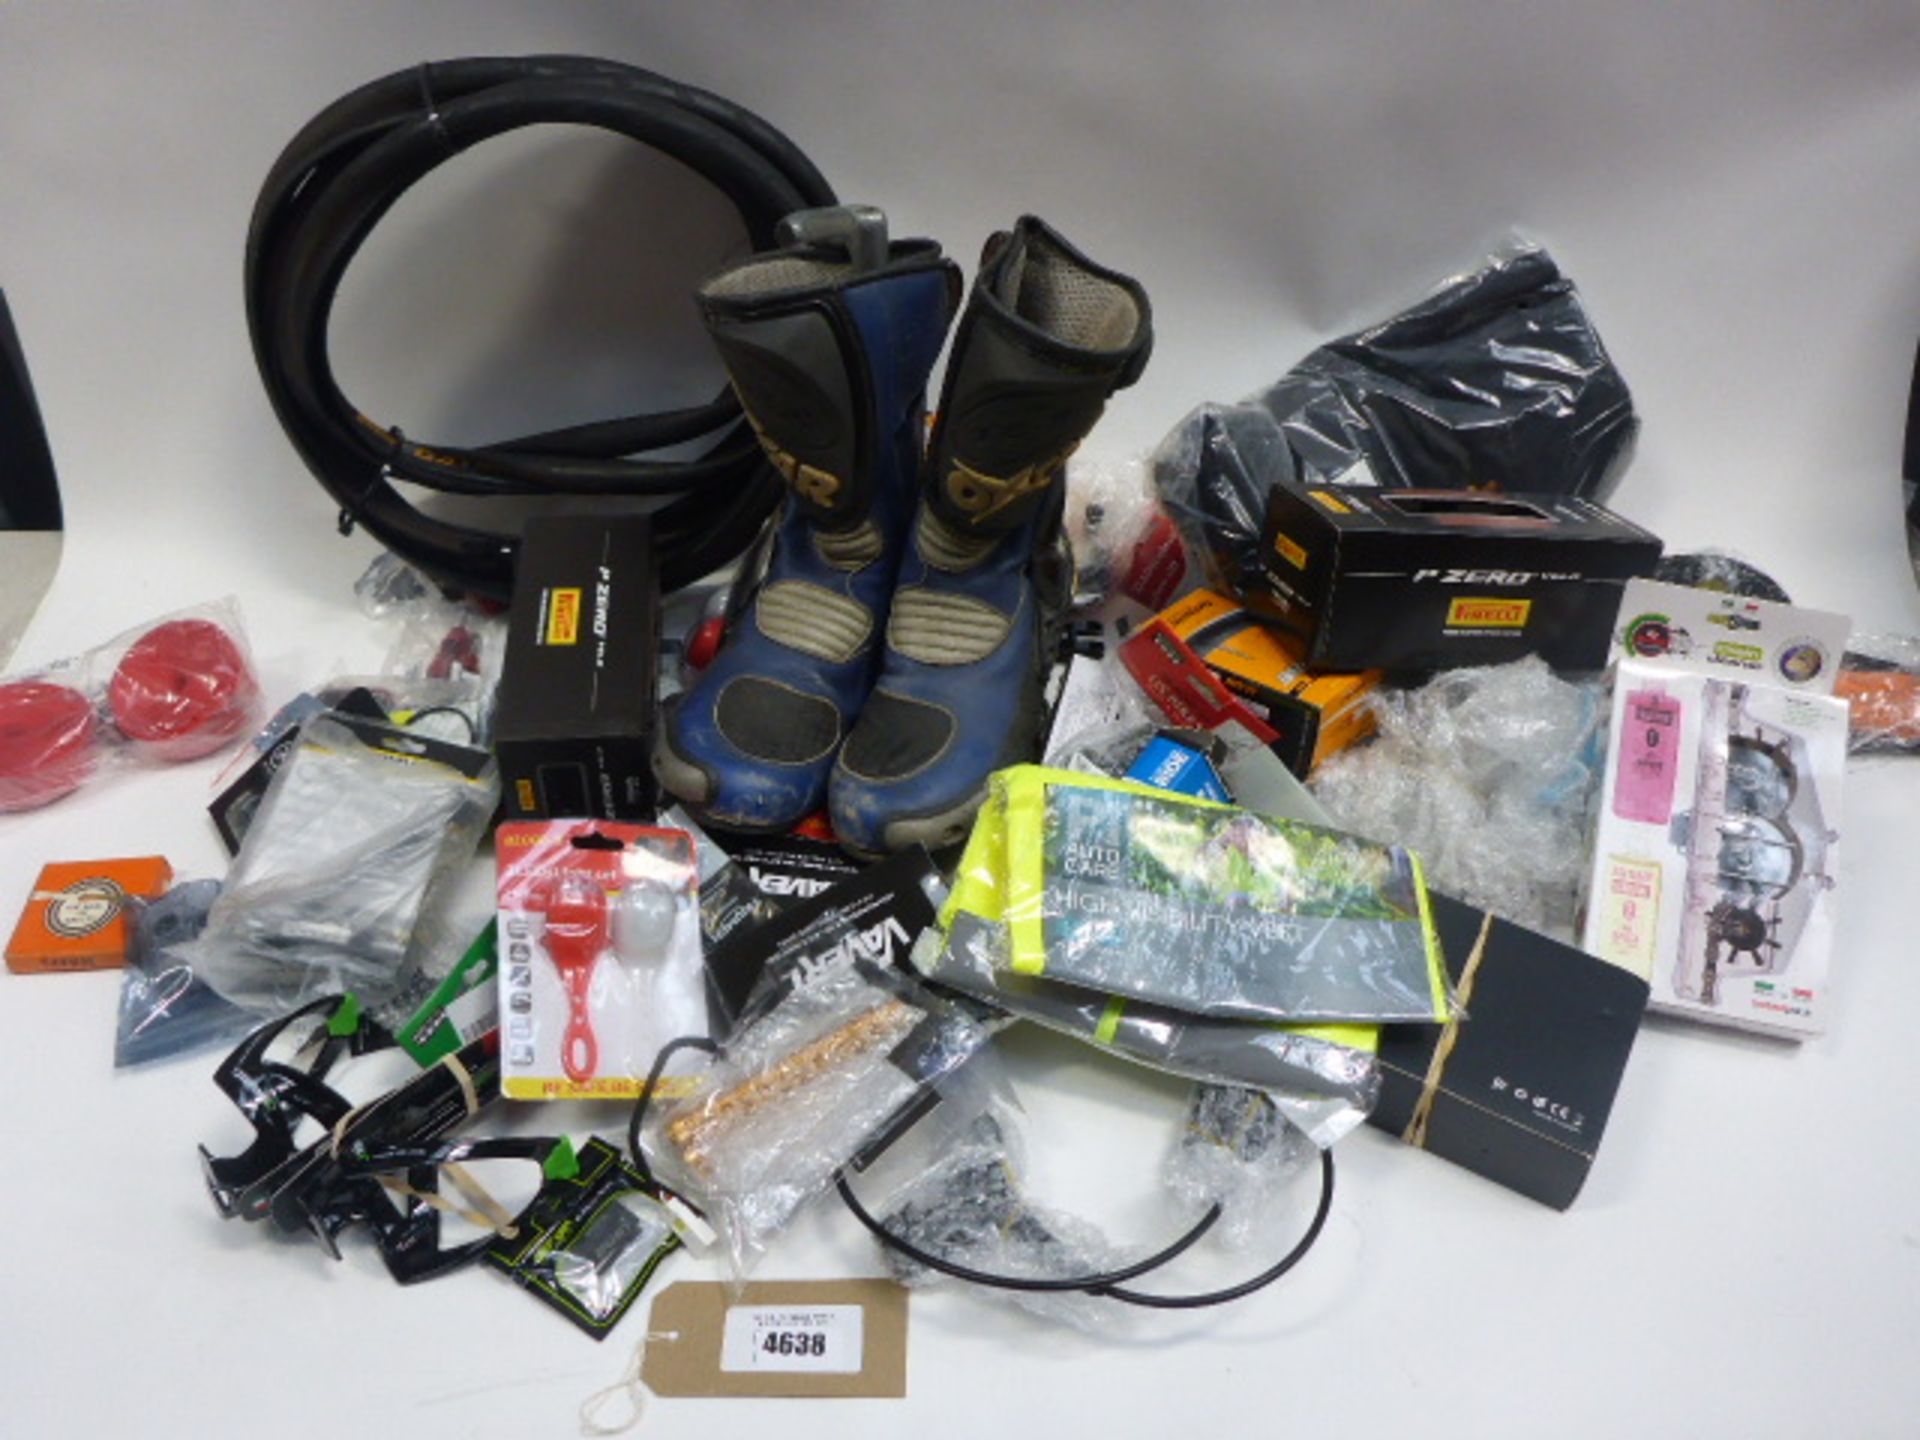 Bag containing bike/motorbike parts and accessories including inner tubes, boots, tyres, chain